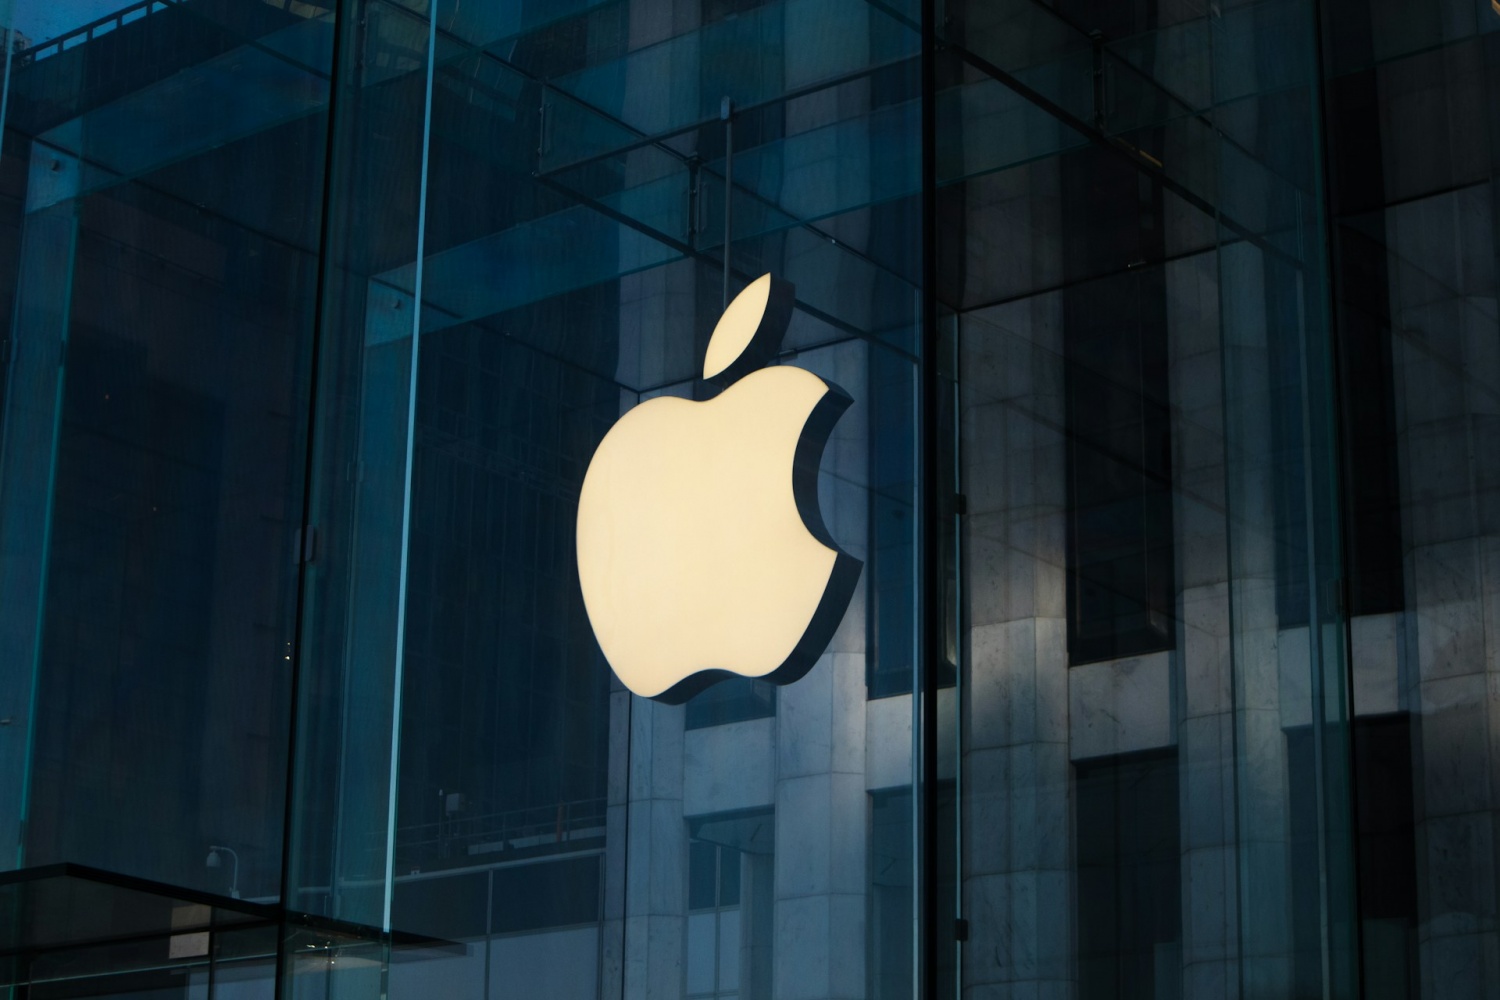 Apple Aims to Be Carbon-Neutral by 2030 as 95% of 'Direct' Manufacturing Spend Transitions to Clean Energy